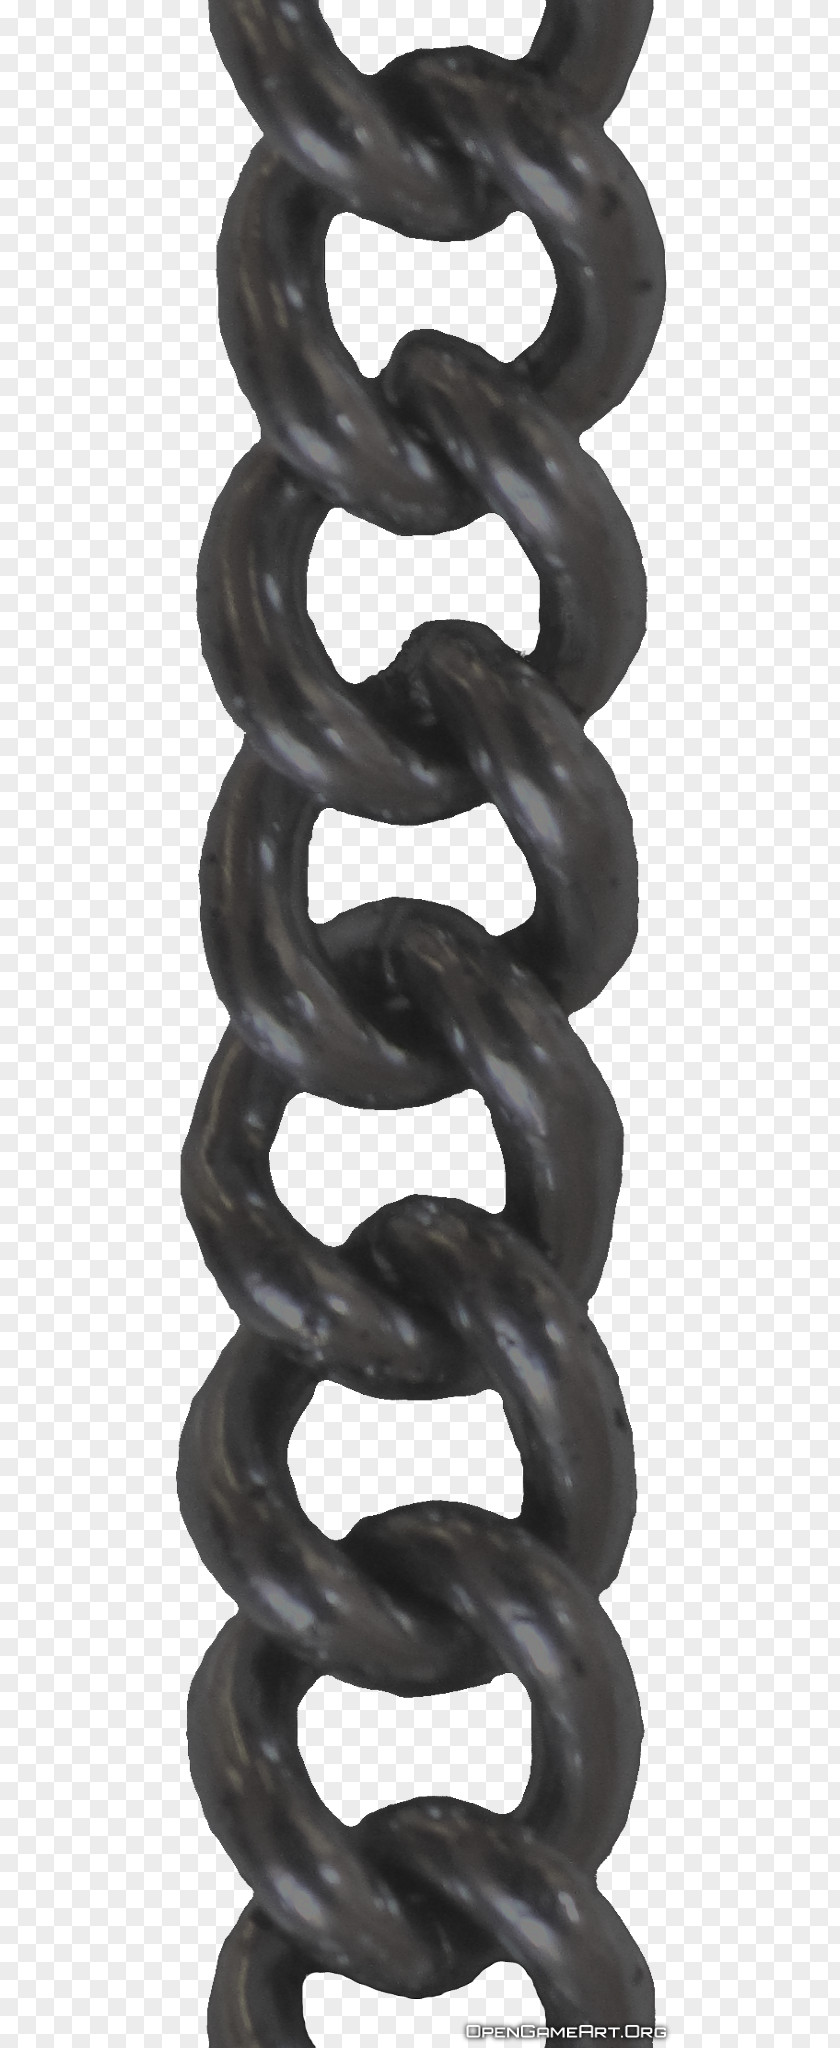 Black Chain Image Icon PNG